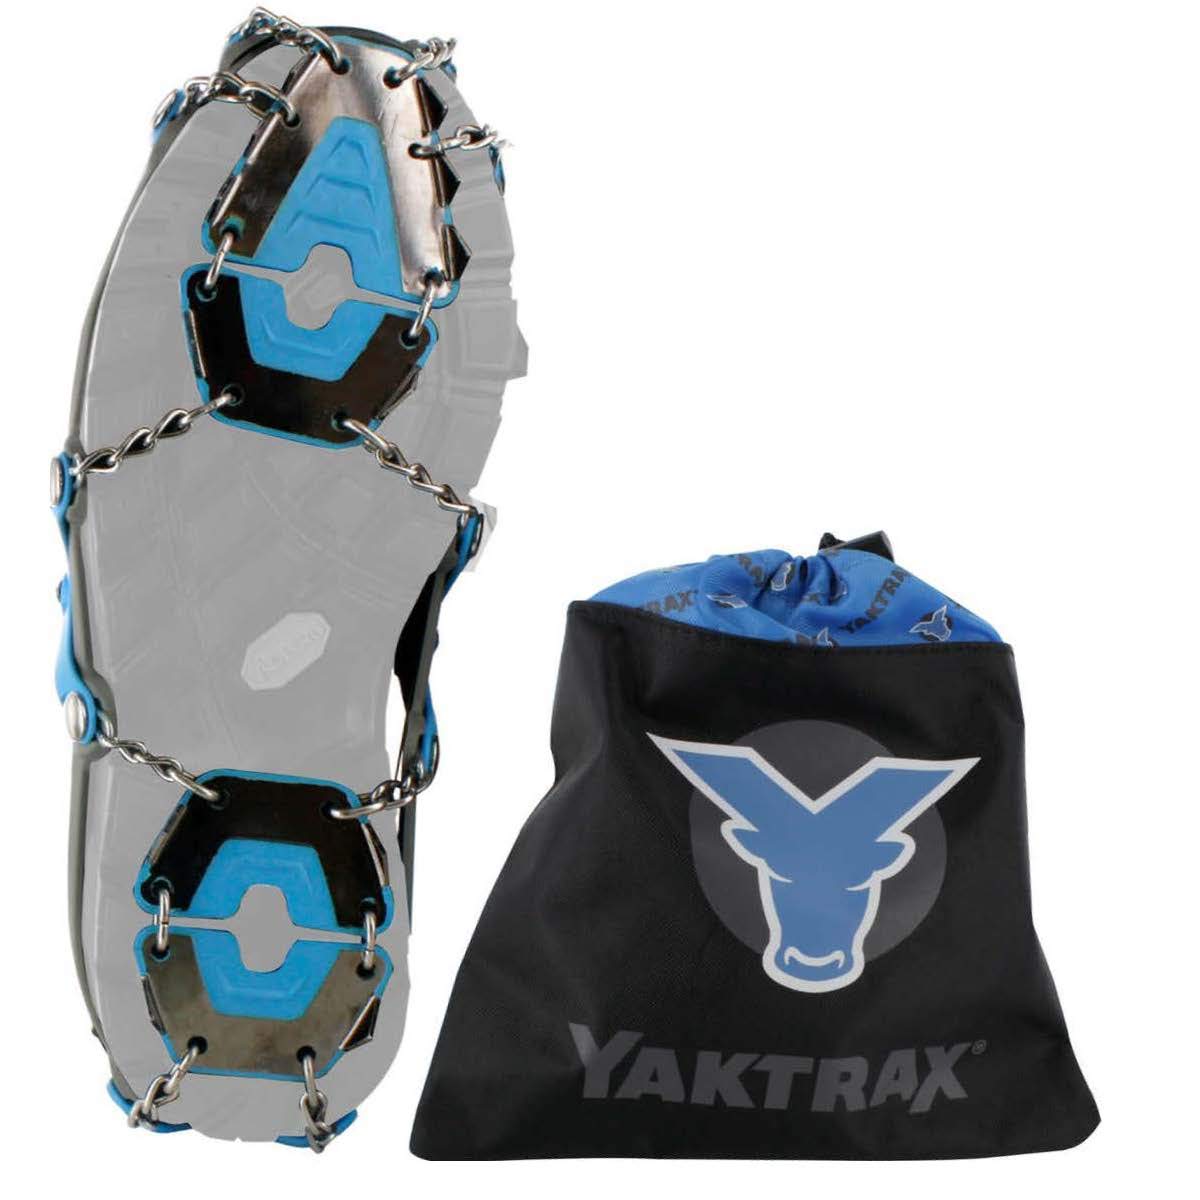 Yaktrax Summit Heavy Duty Traction Cleats with Carbon Steel Spikes for Snow and Ice (1 Pair)